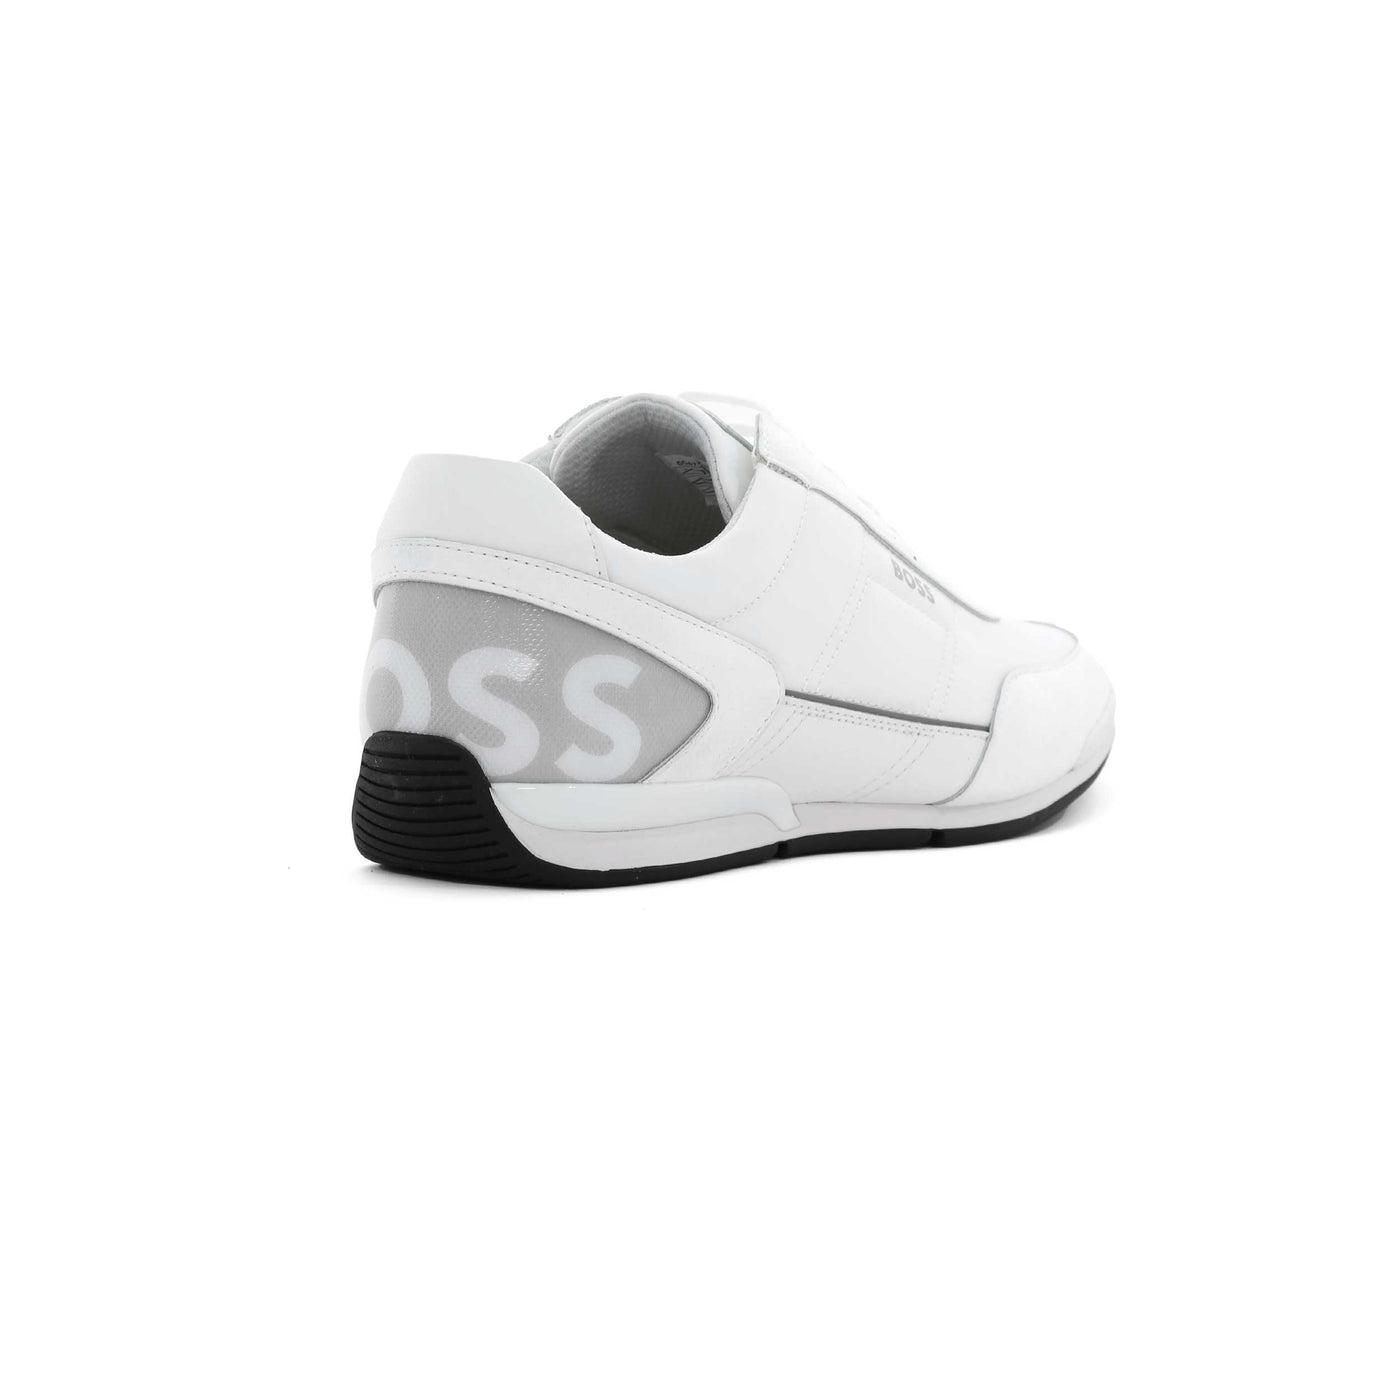 BOSS Saturn Lowp flny Trainer in White